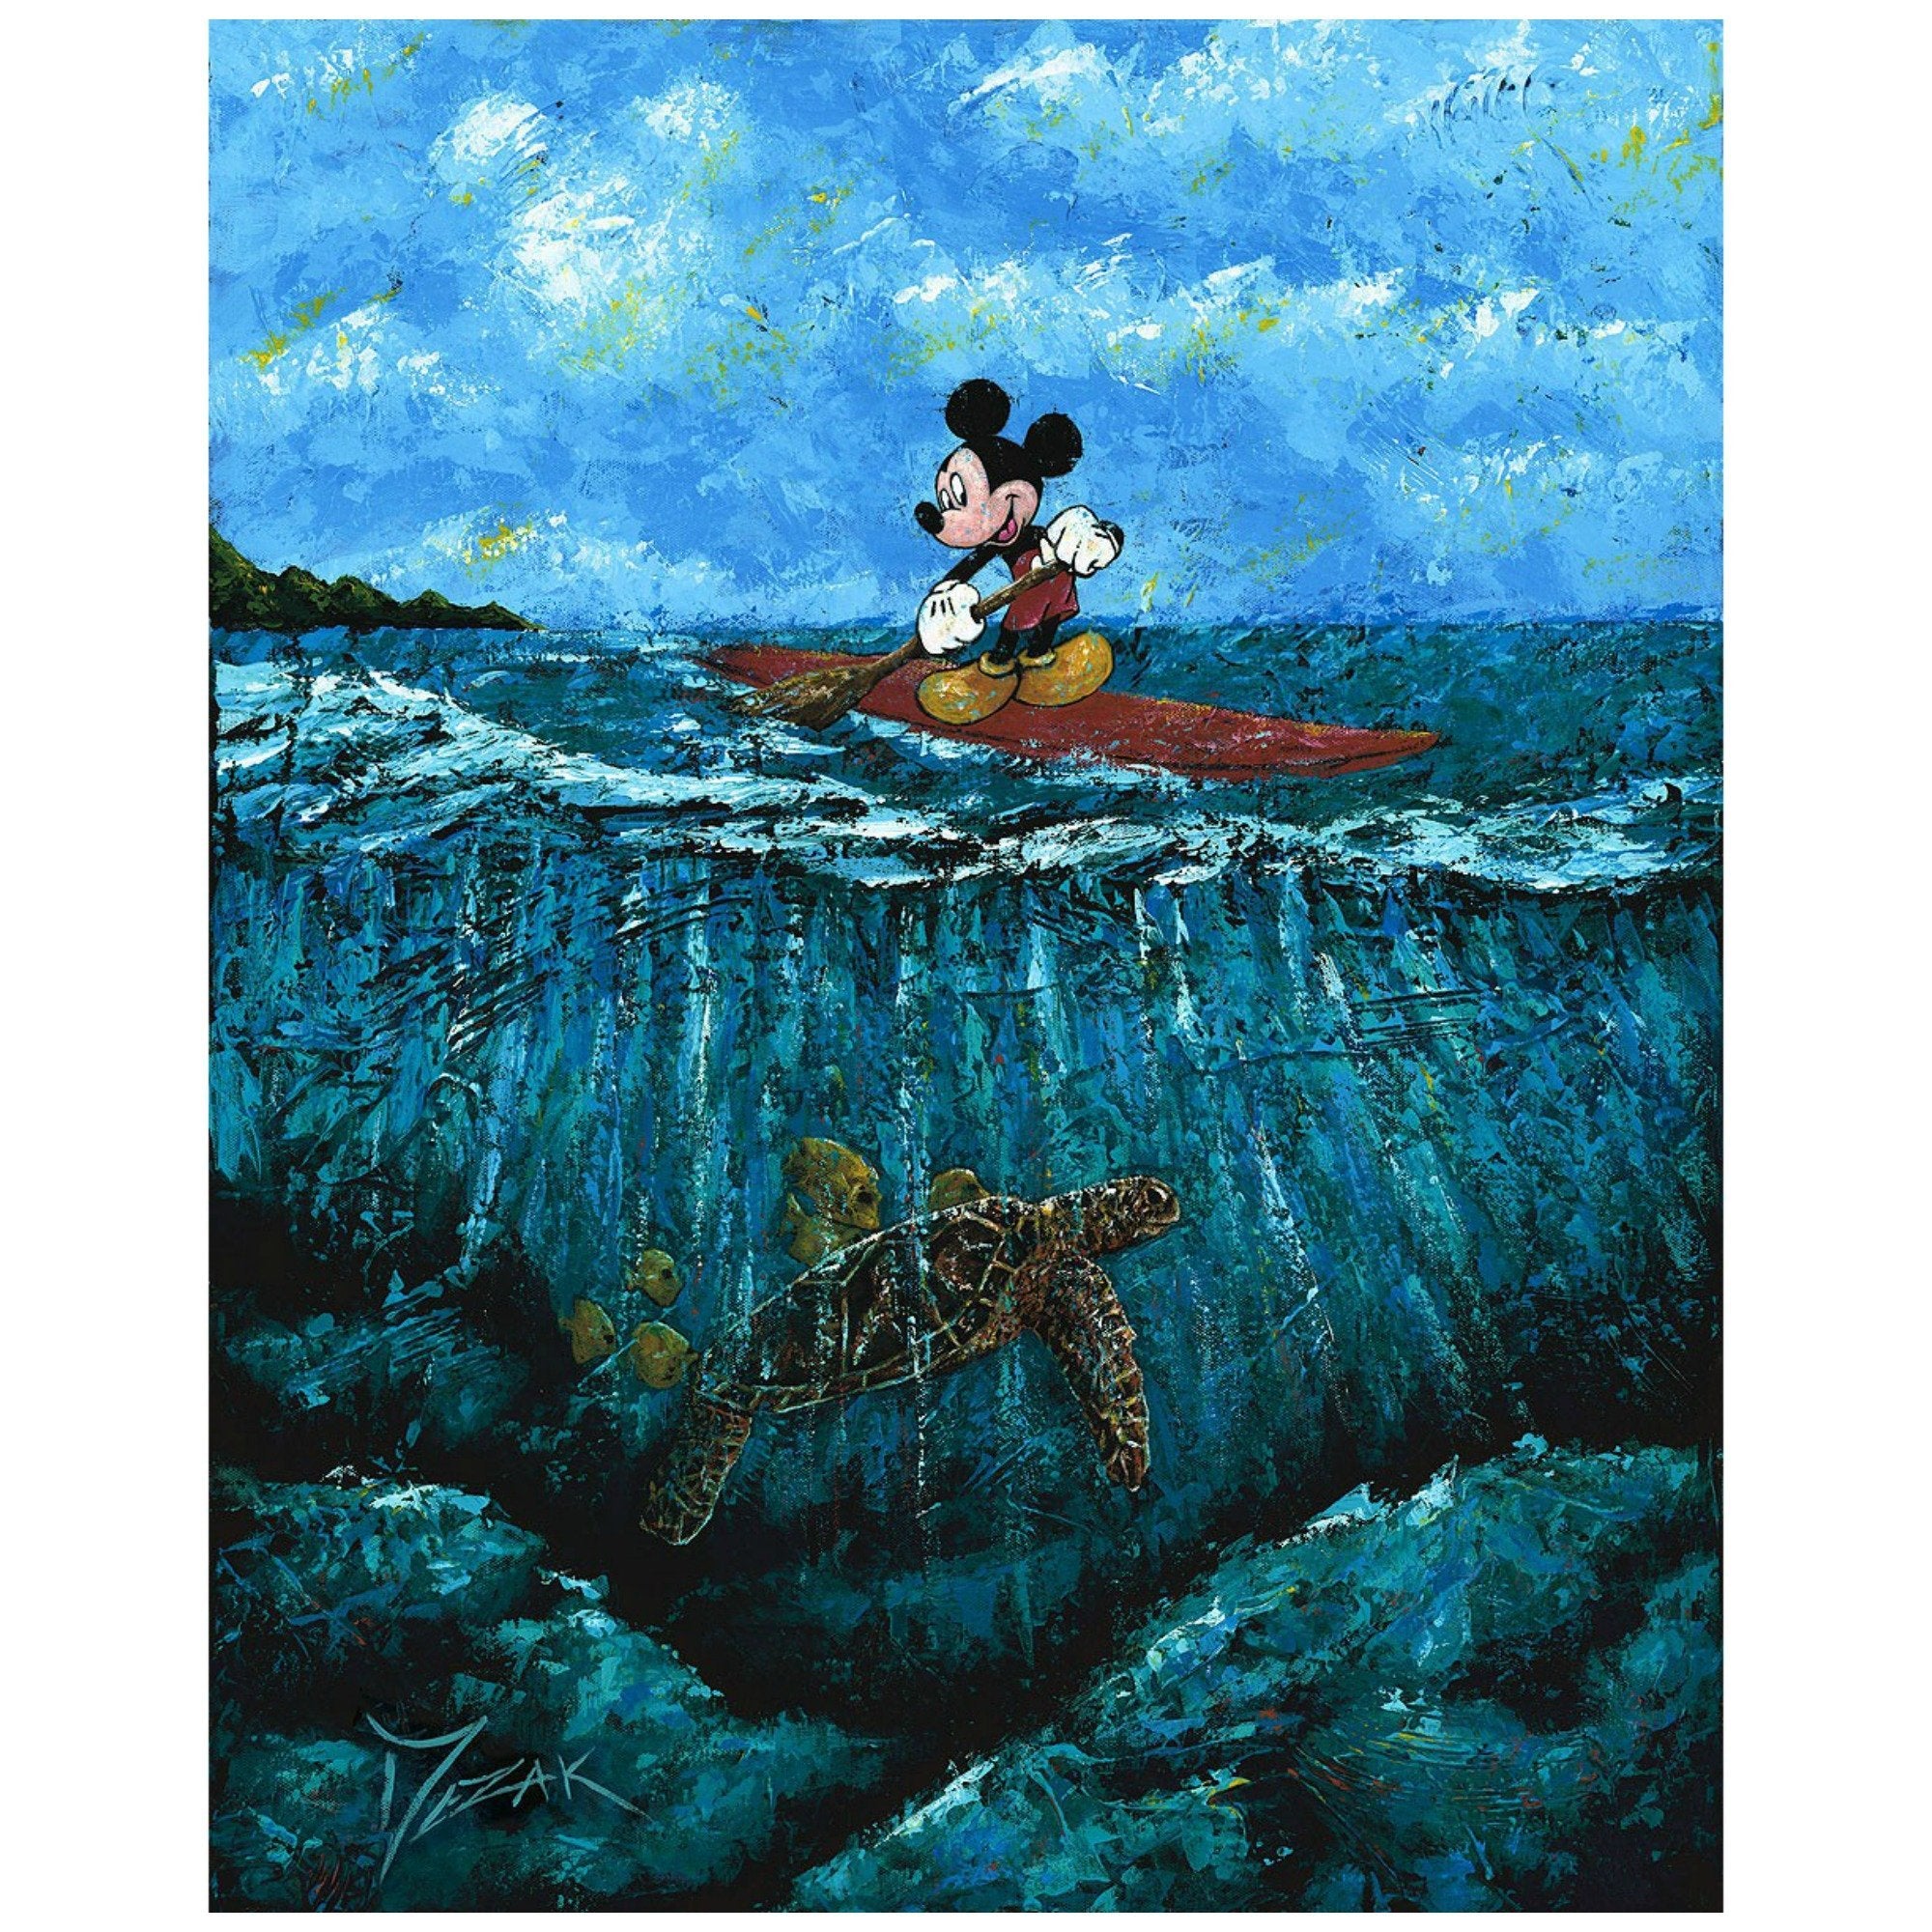 Mickey's Summer by Trevor Mezak.  Mickey standing on his surfboard as he paddles and watches the tortoise below.